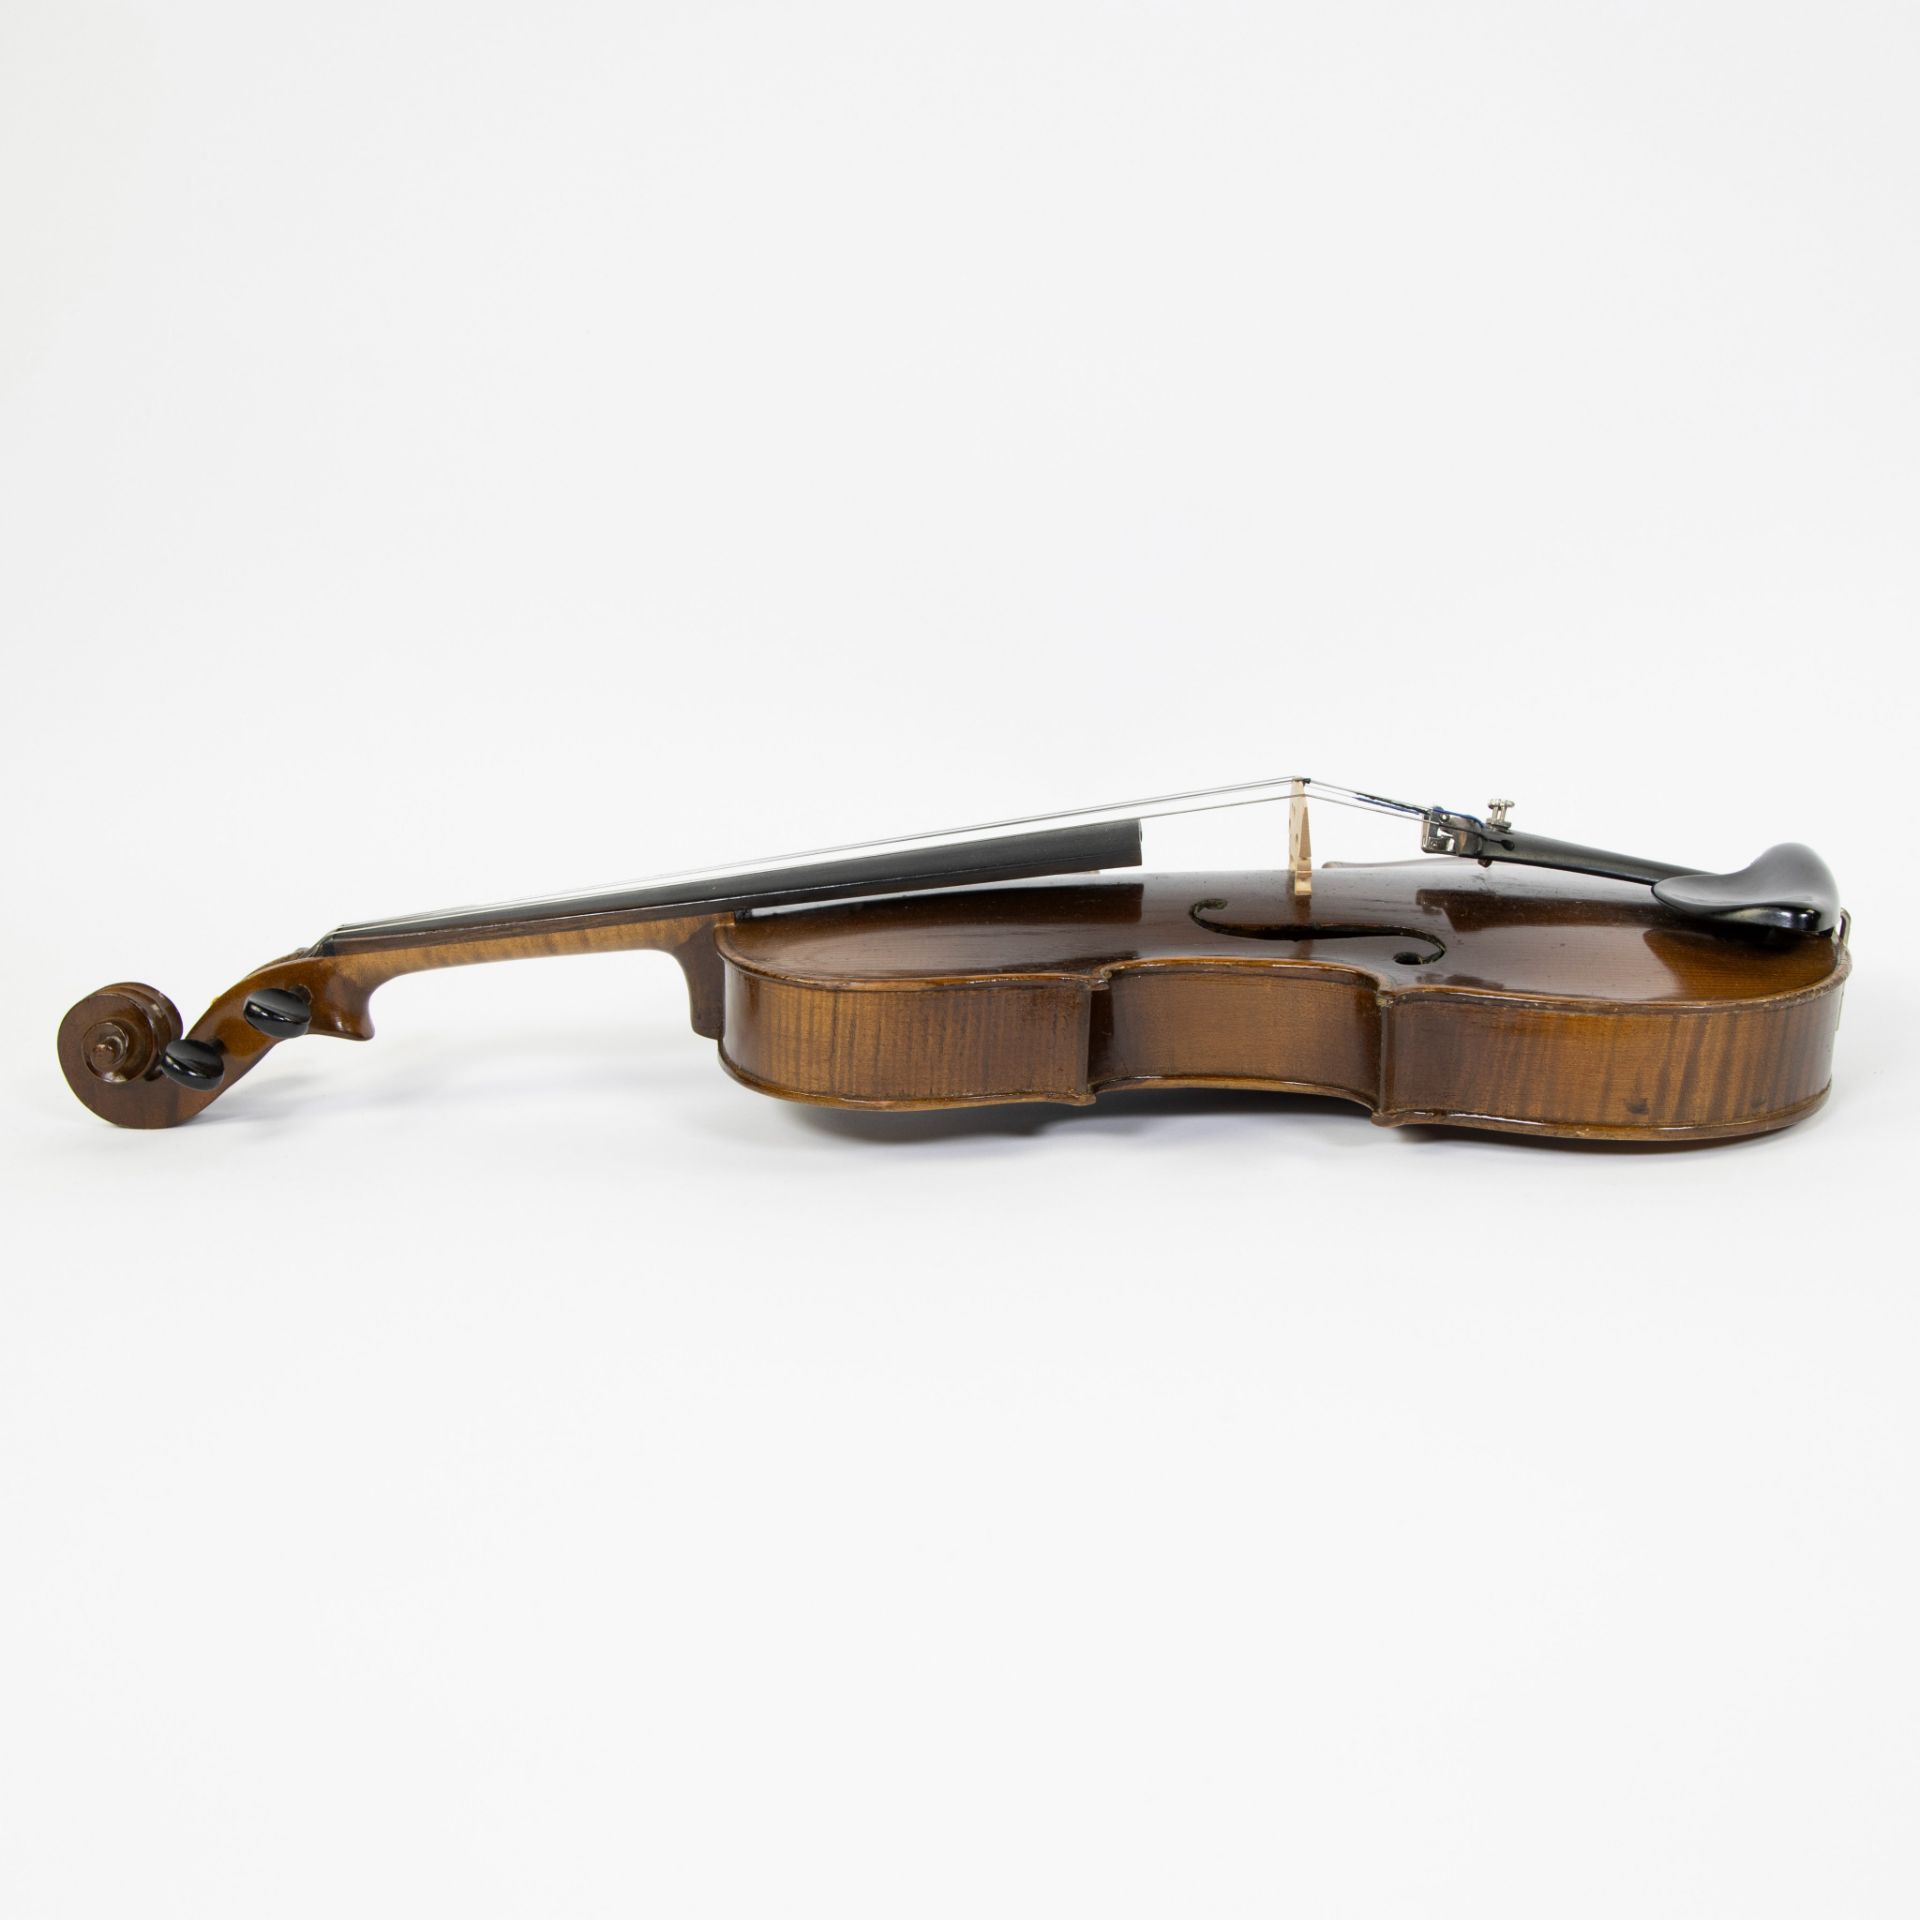 Violin label 'Jacob Schmidbauer, ano 1839', 360mm, playable, wooden case - Image 2 of 5